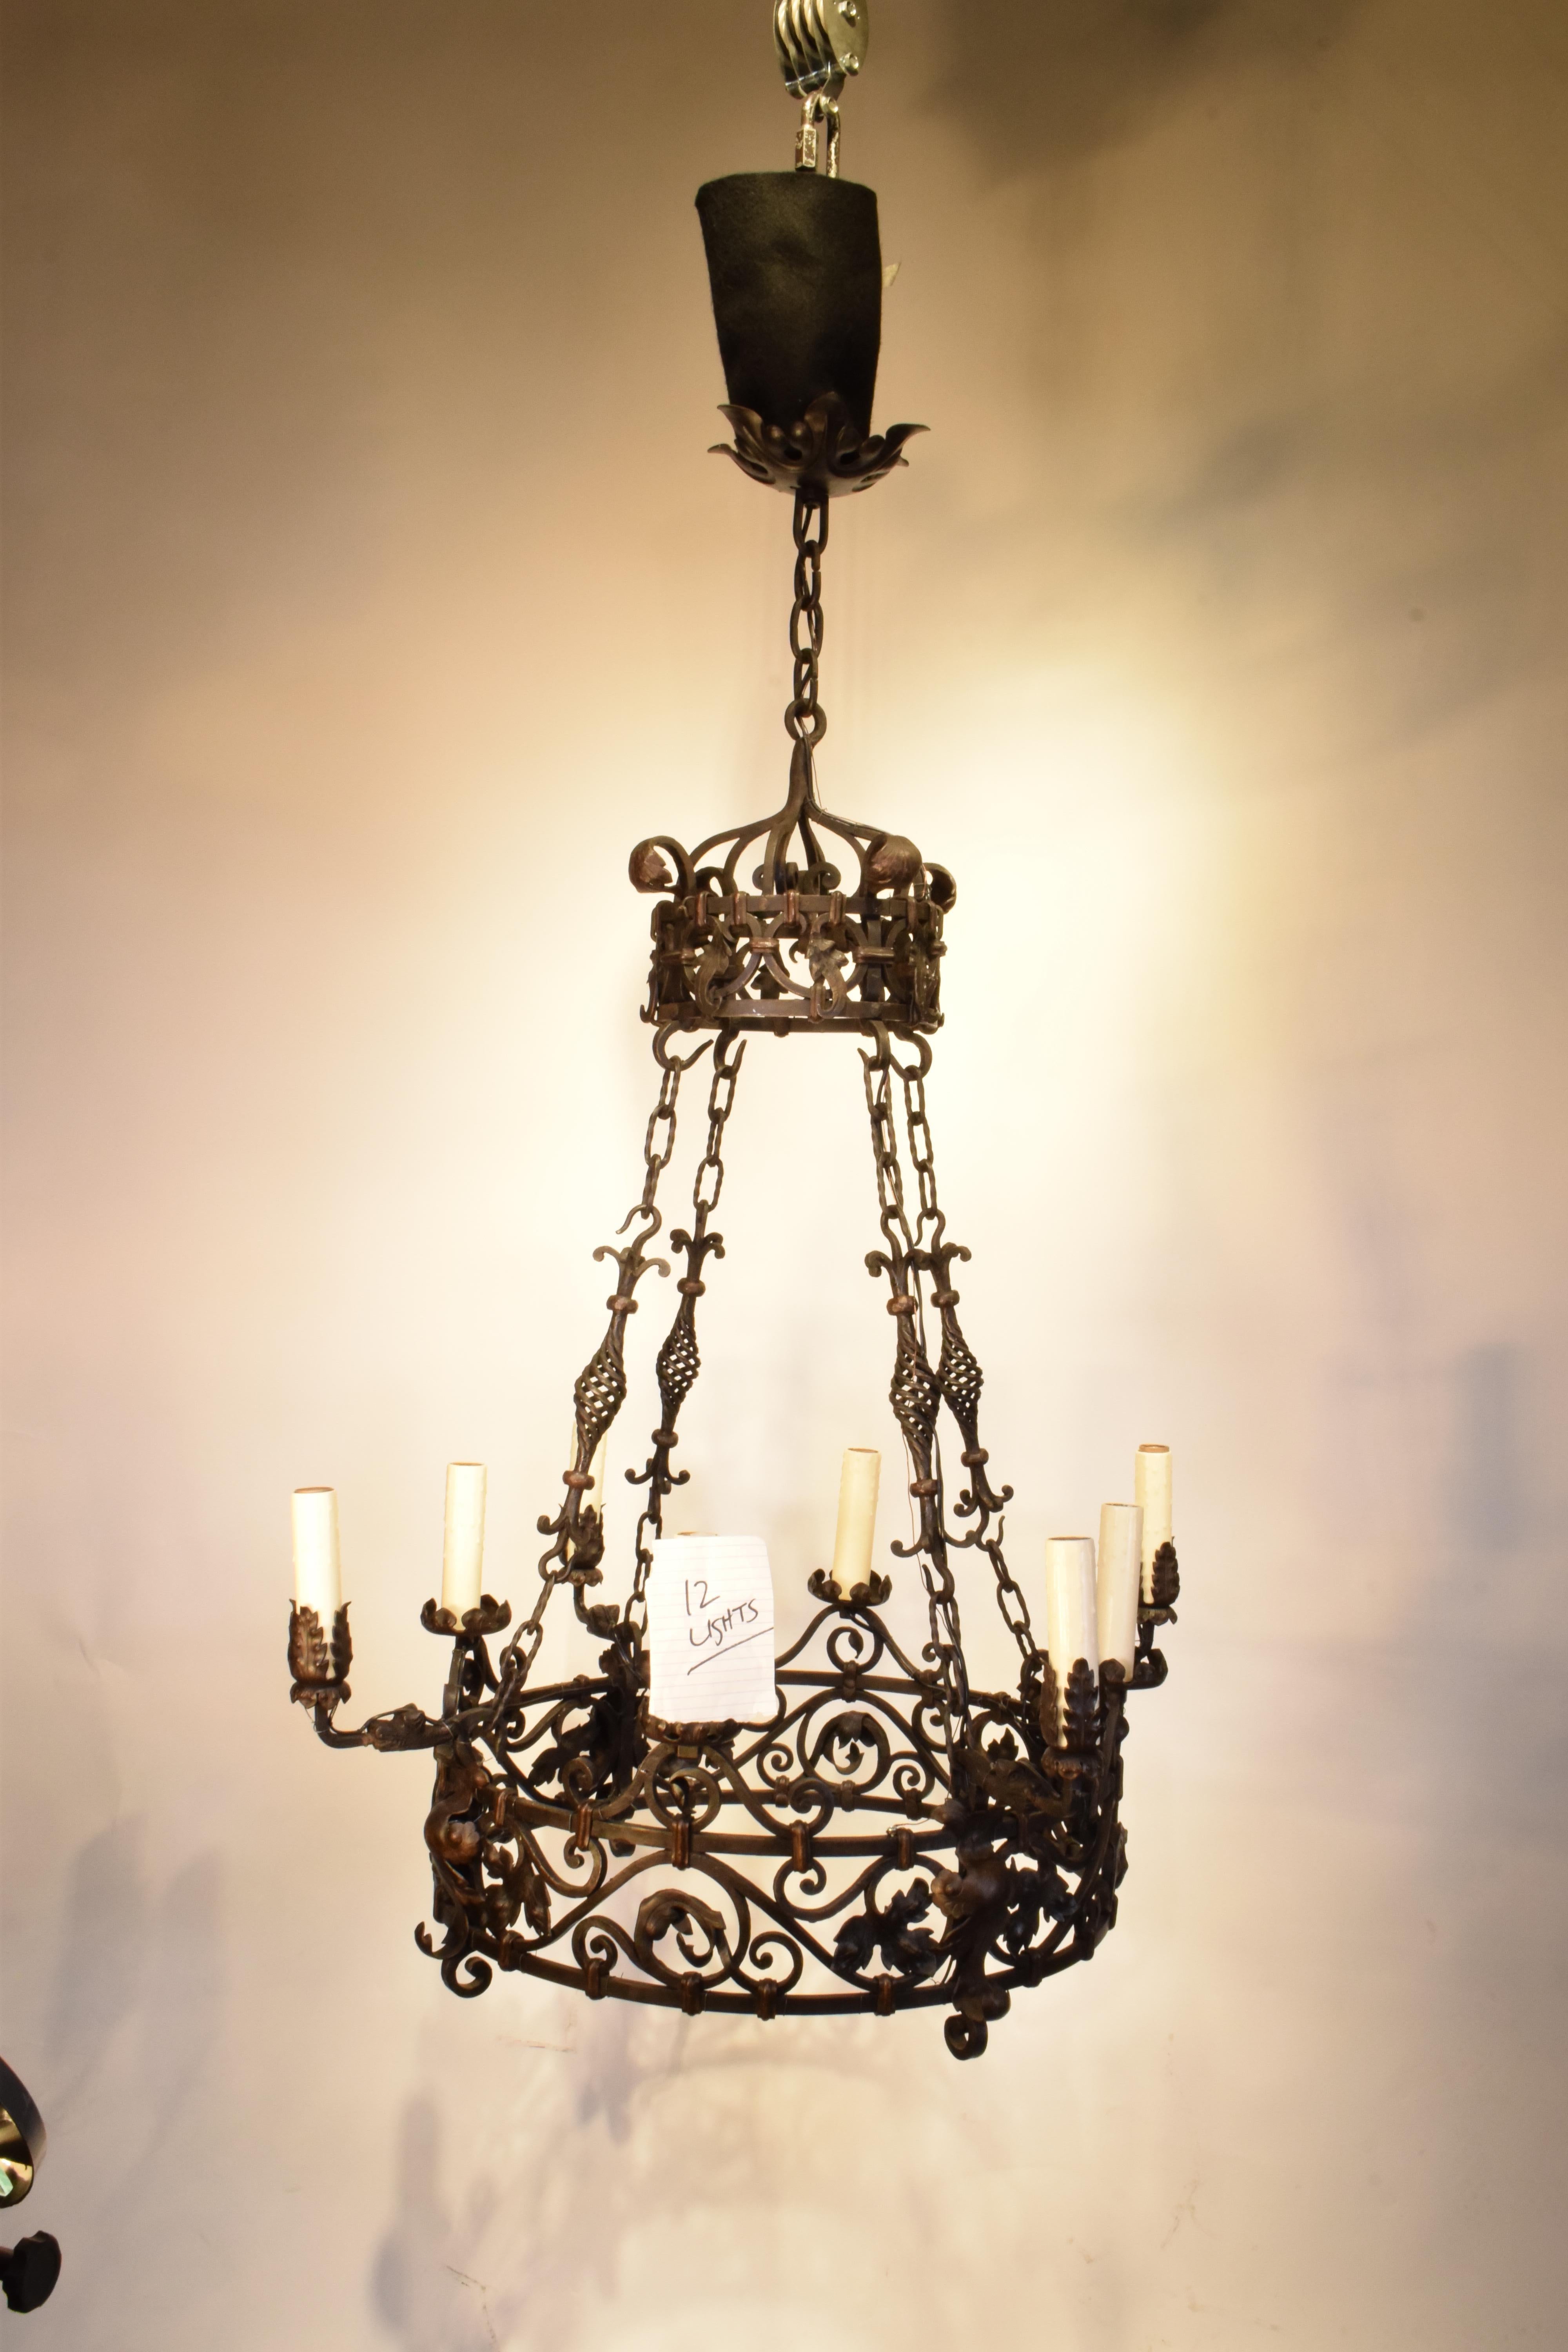 Hammered Iron Chandelier For Sale